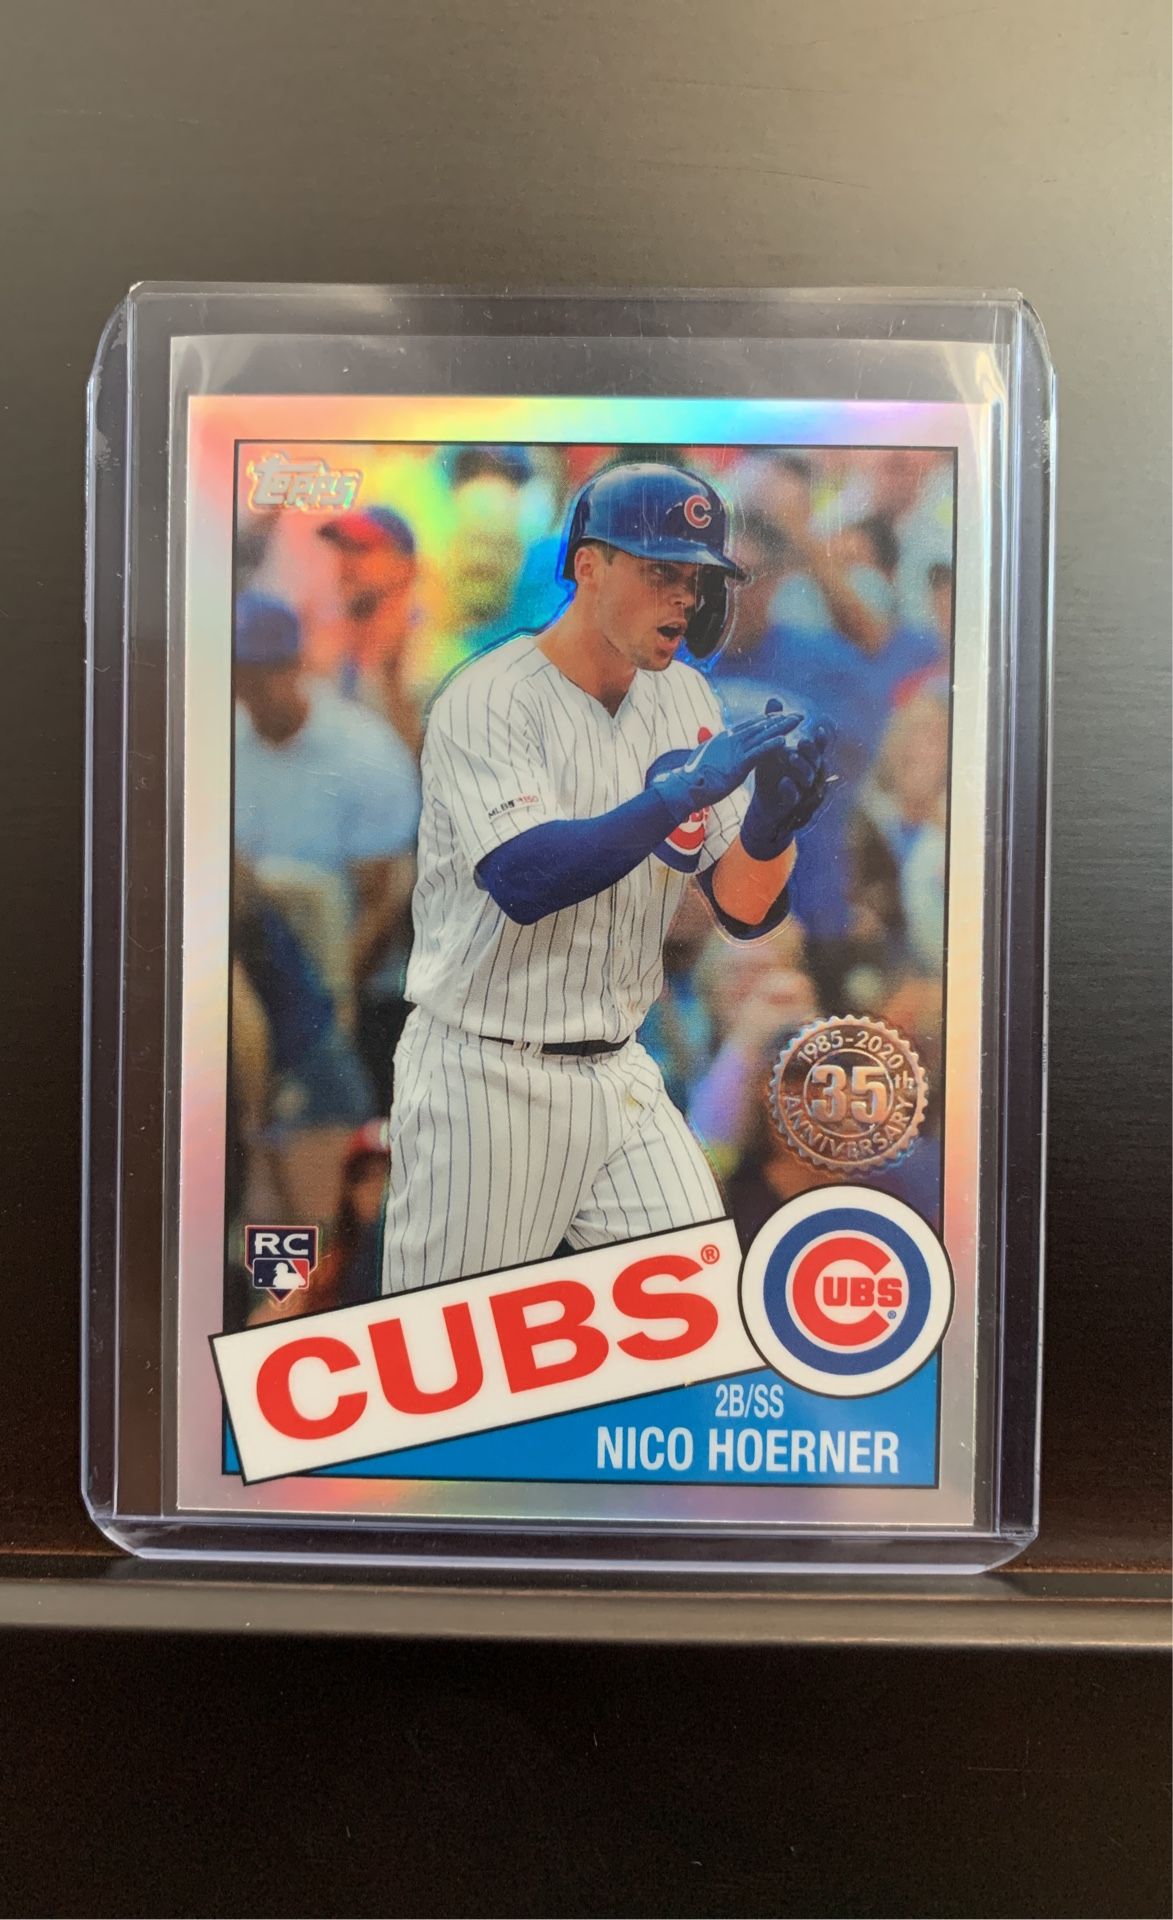 Nico Noerner 2020 Topps Chrome 1985 35th Anniversary Refractor Rookie Card⚾️ # 85TC12